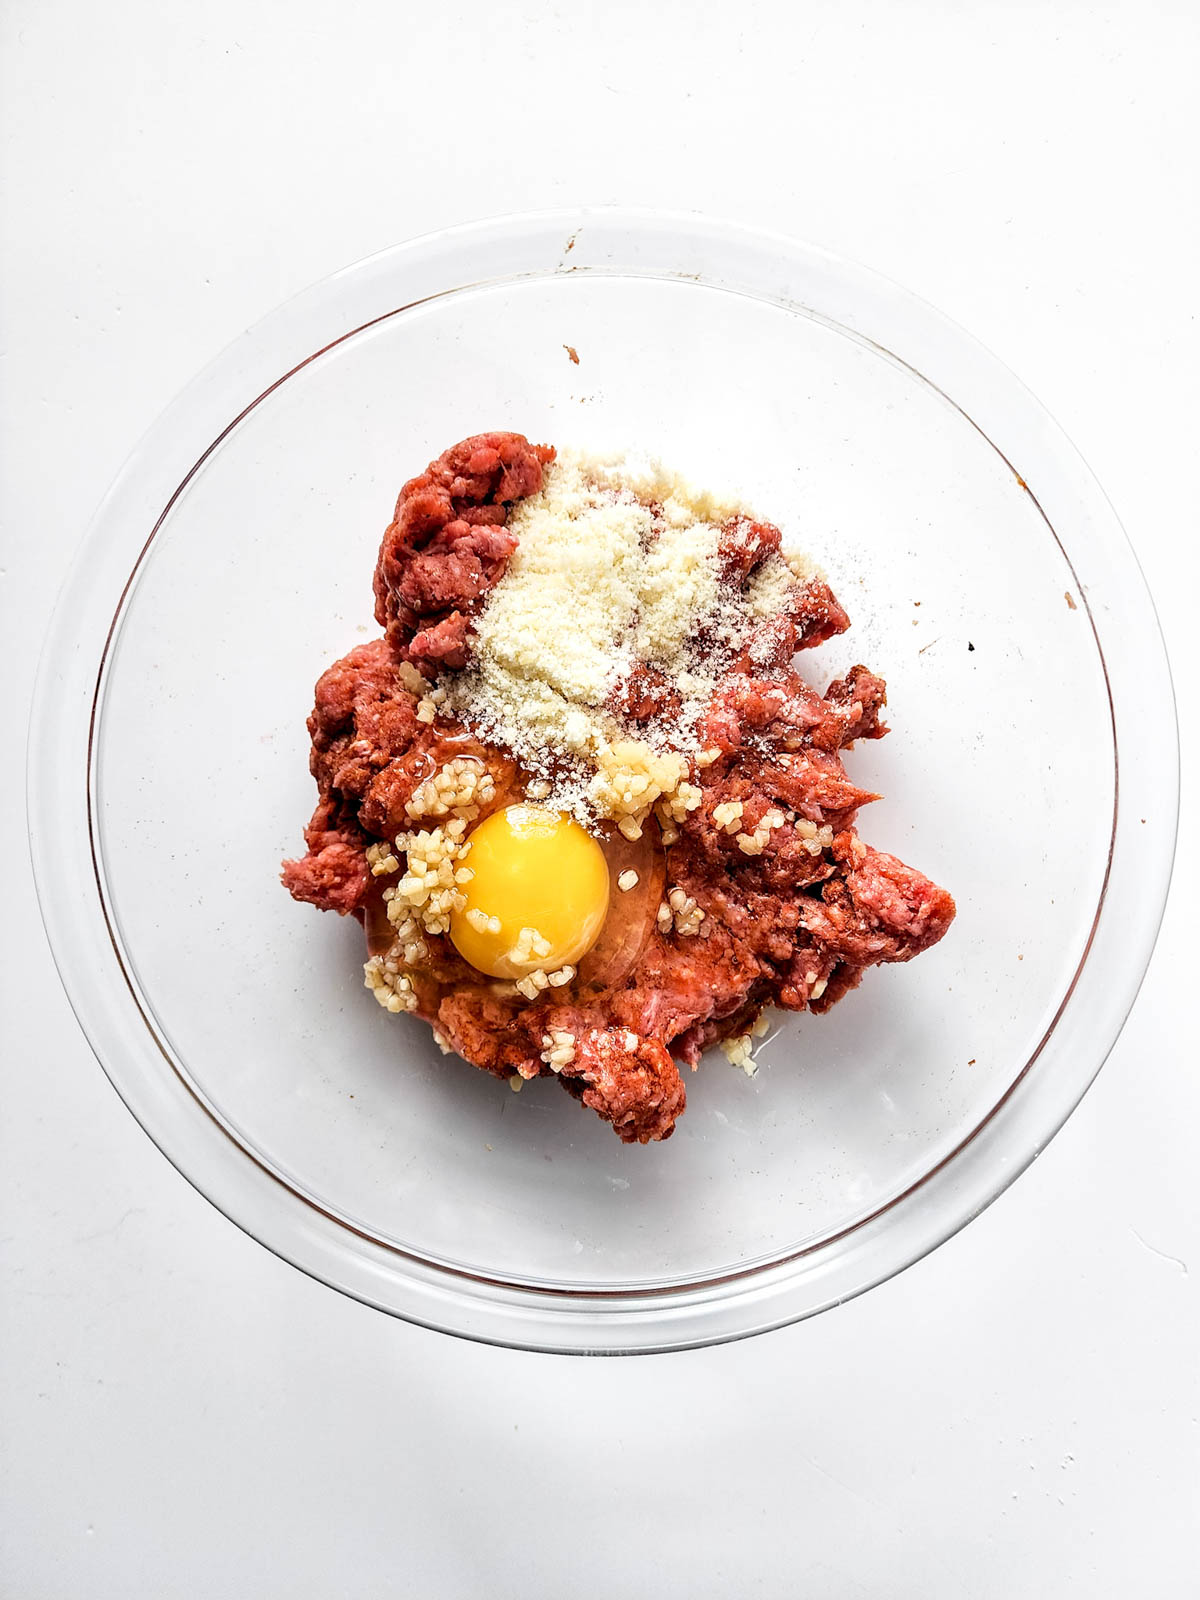 Ground beef with egg, garlic and cheese in glass bowl